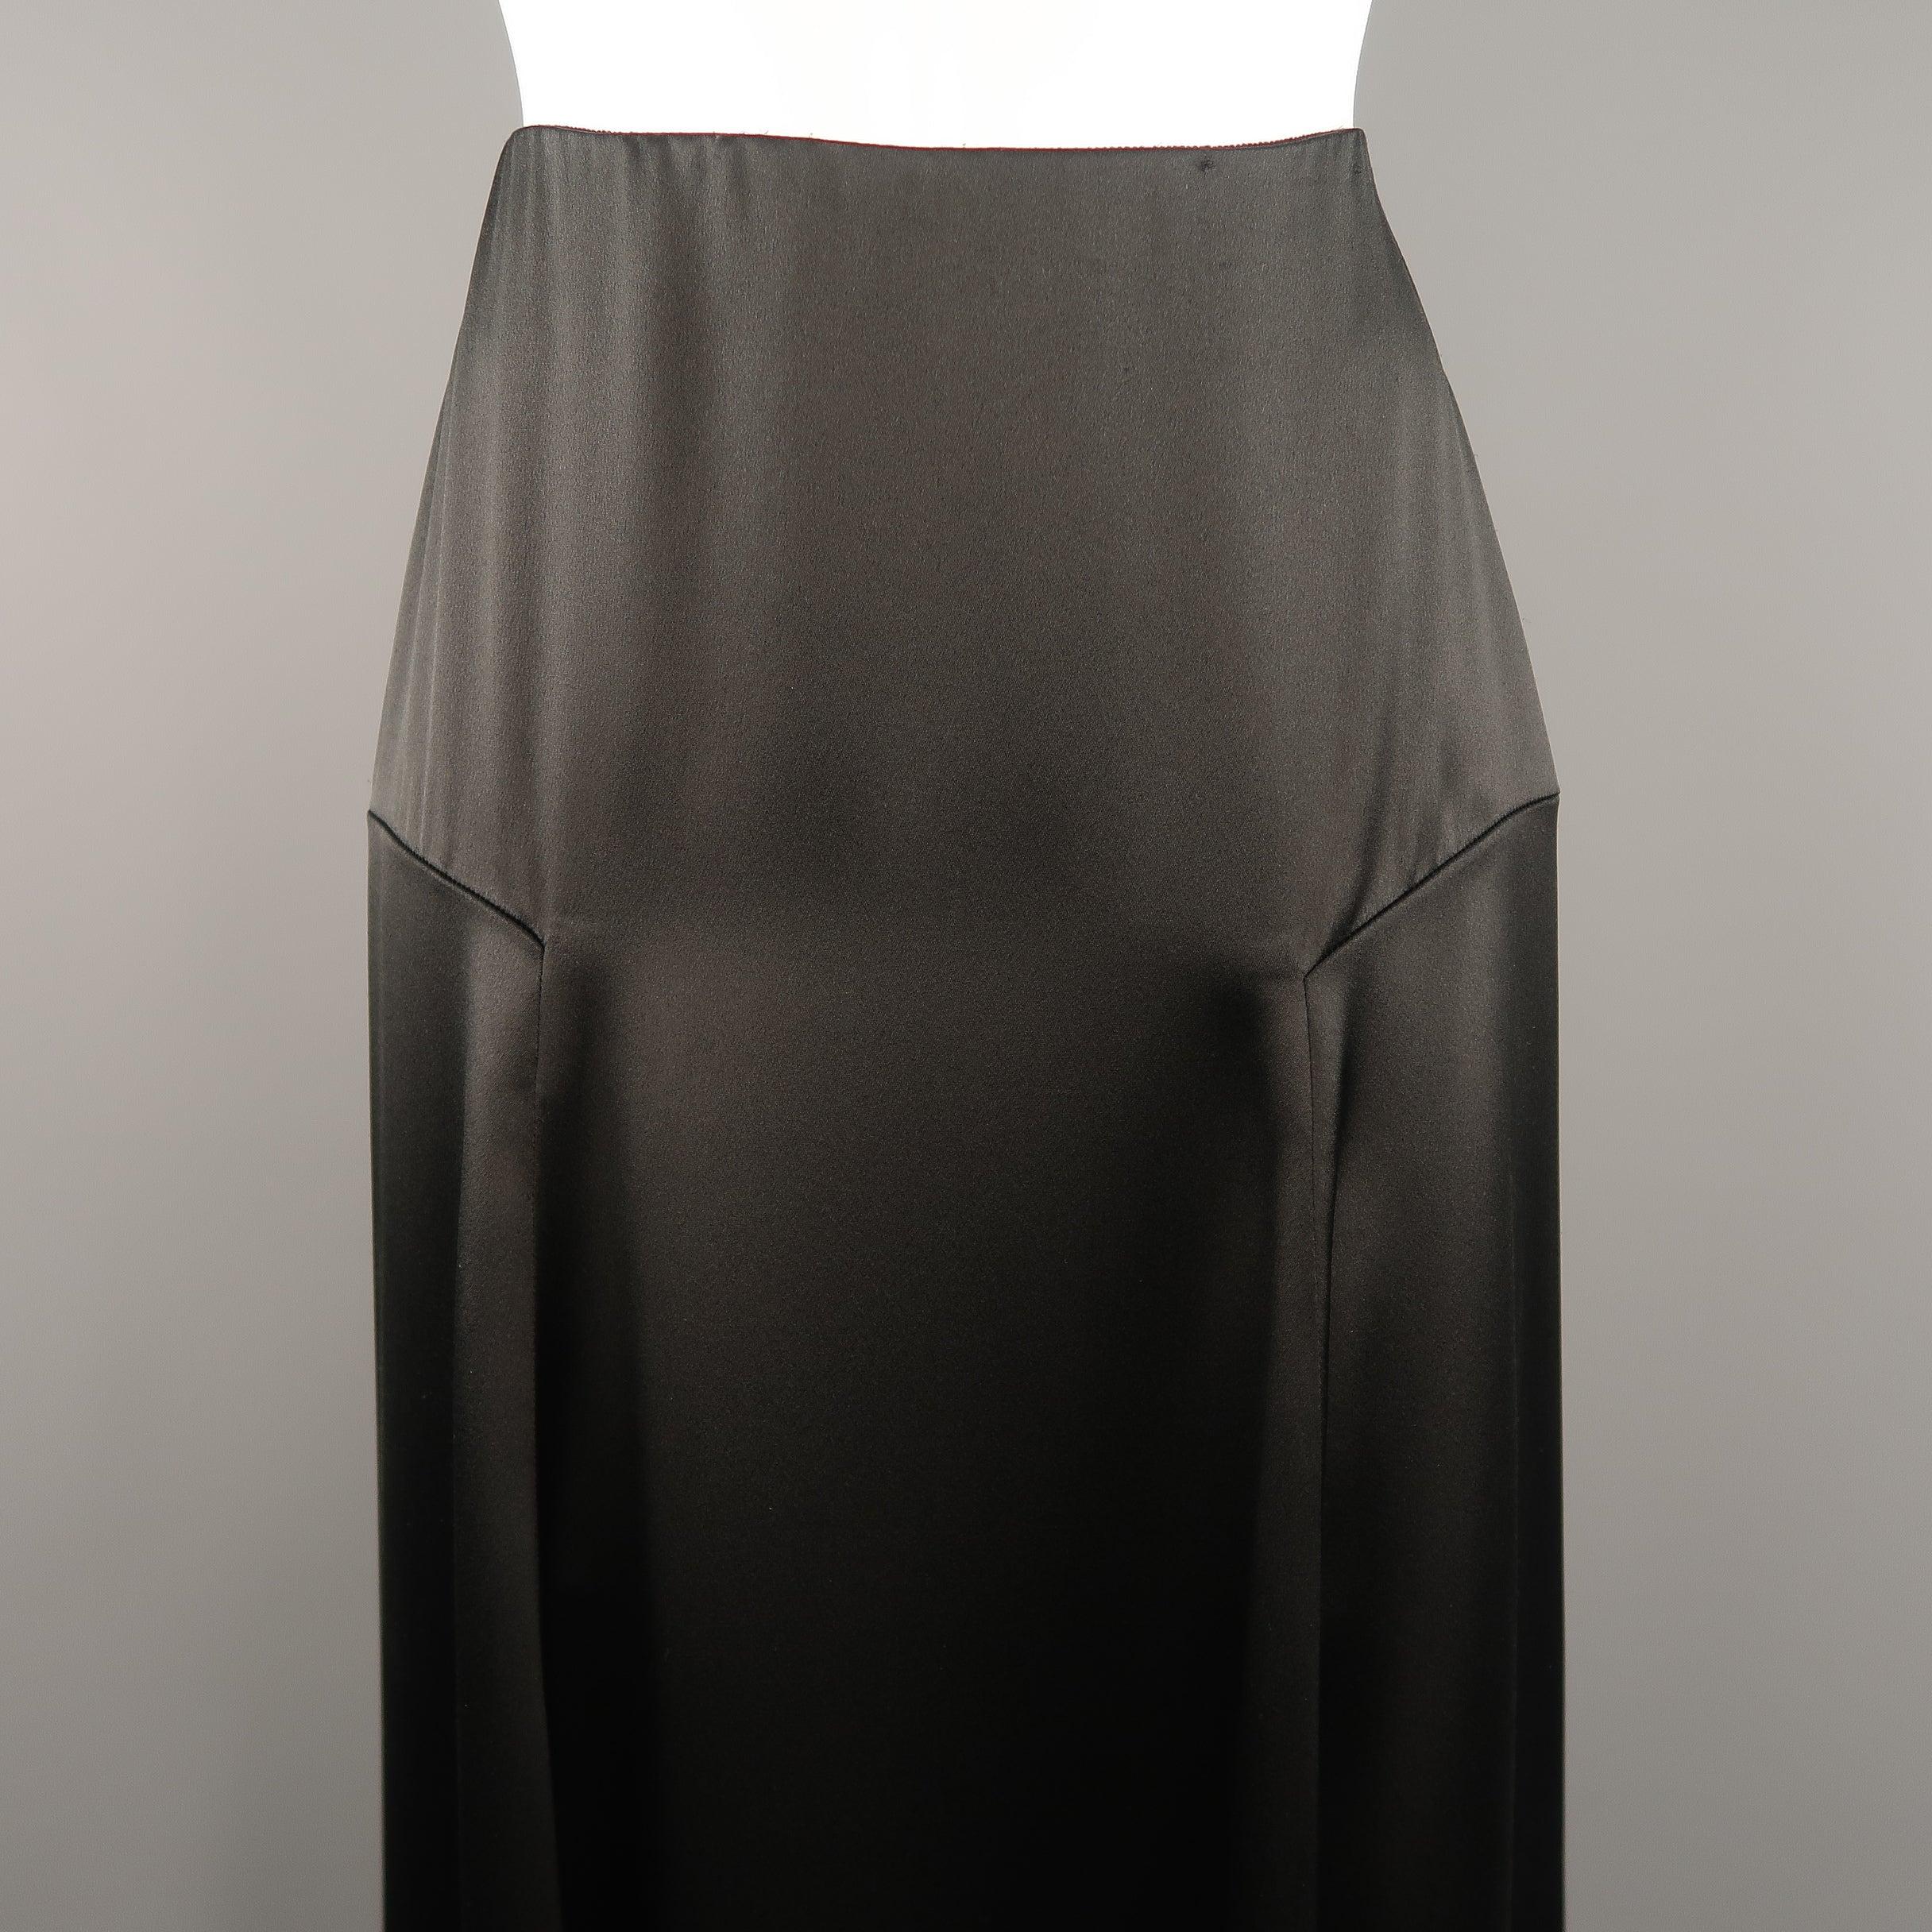 RALPH LAUREN COLLECTION maxi skirt comes in silk satin with paneled dart construction and A line ruffled hem silhouette. Minor wear.Made in USA.
Very Good Pre-Owned Condition.
 

Marked:   2
 

Measurements: 
  
l	Waist: 26.5 inches 
l	Hip: 36